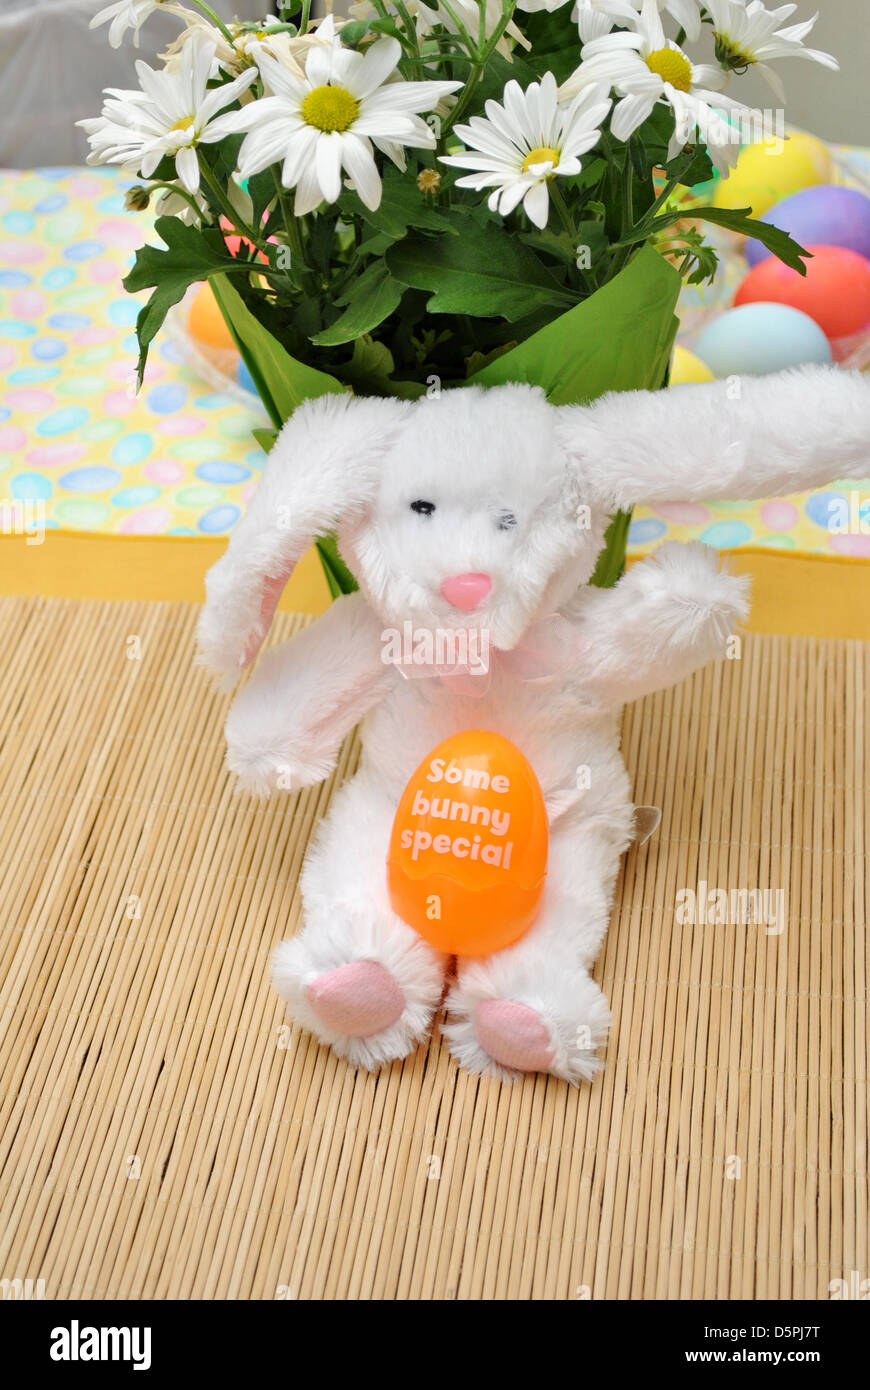 Spring Easter Bunny with a Toy Orange Egg Stock Photo